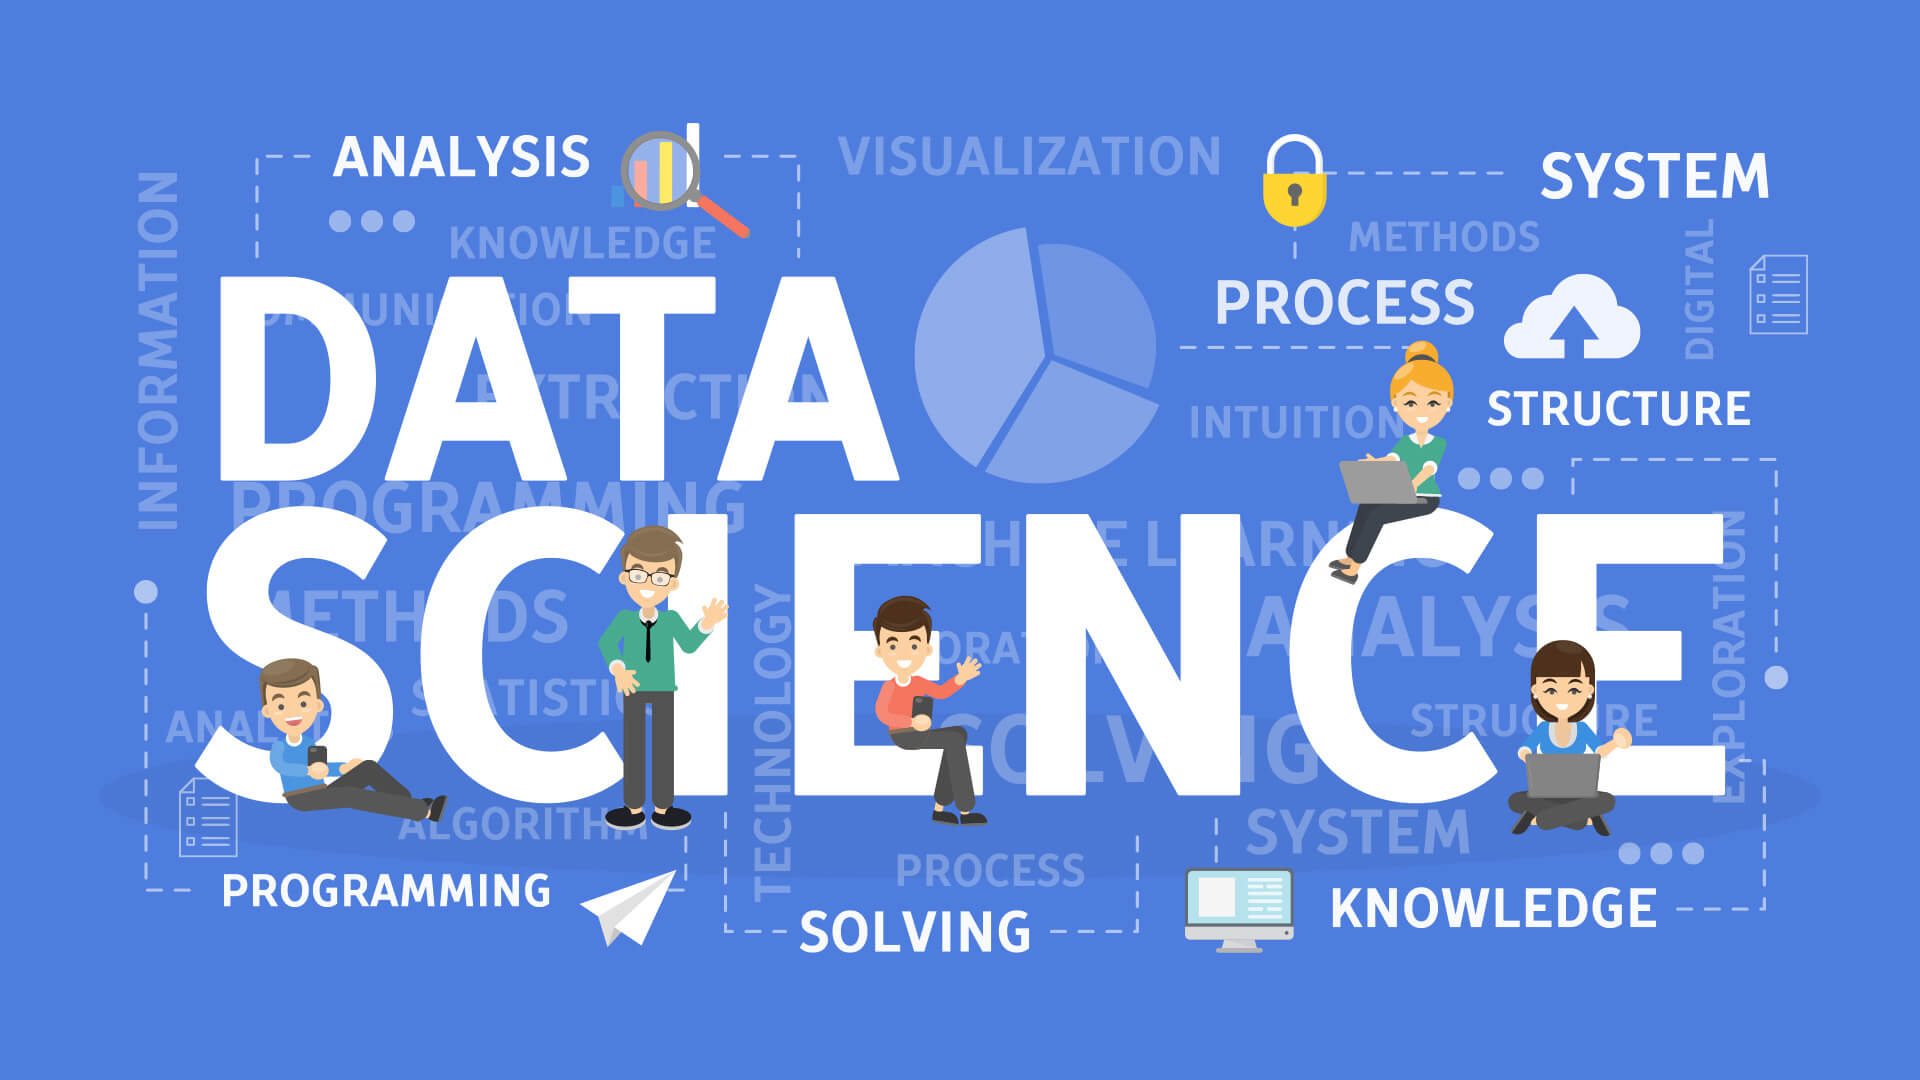 Data is the new oil, Data Science is the New Dimension